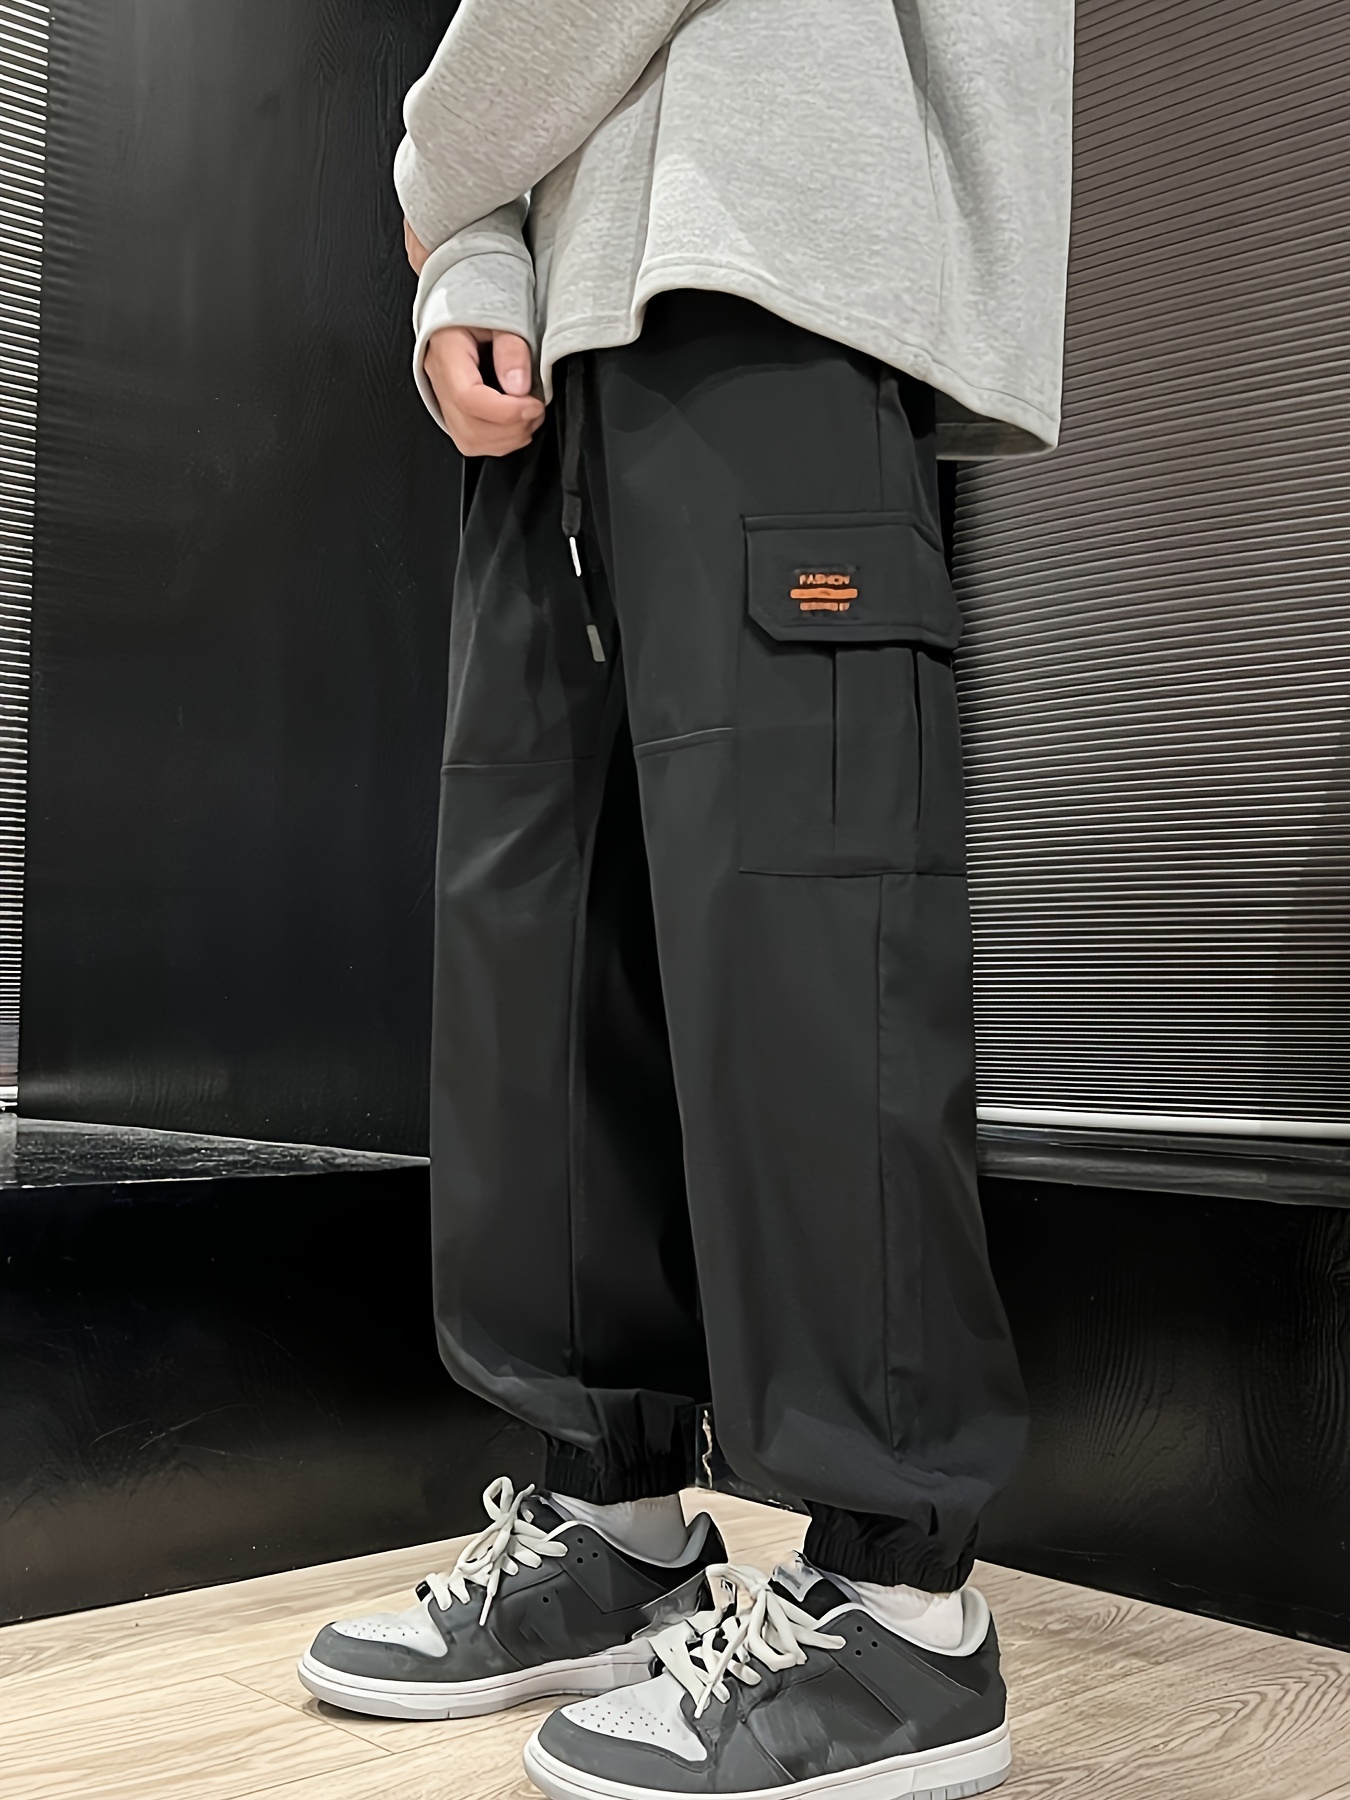 Baggy Cargo Pants Casual Hip Hop Joggers Trendy for Women Trousers